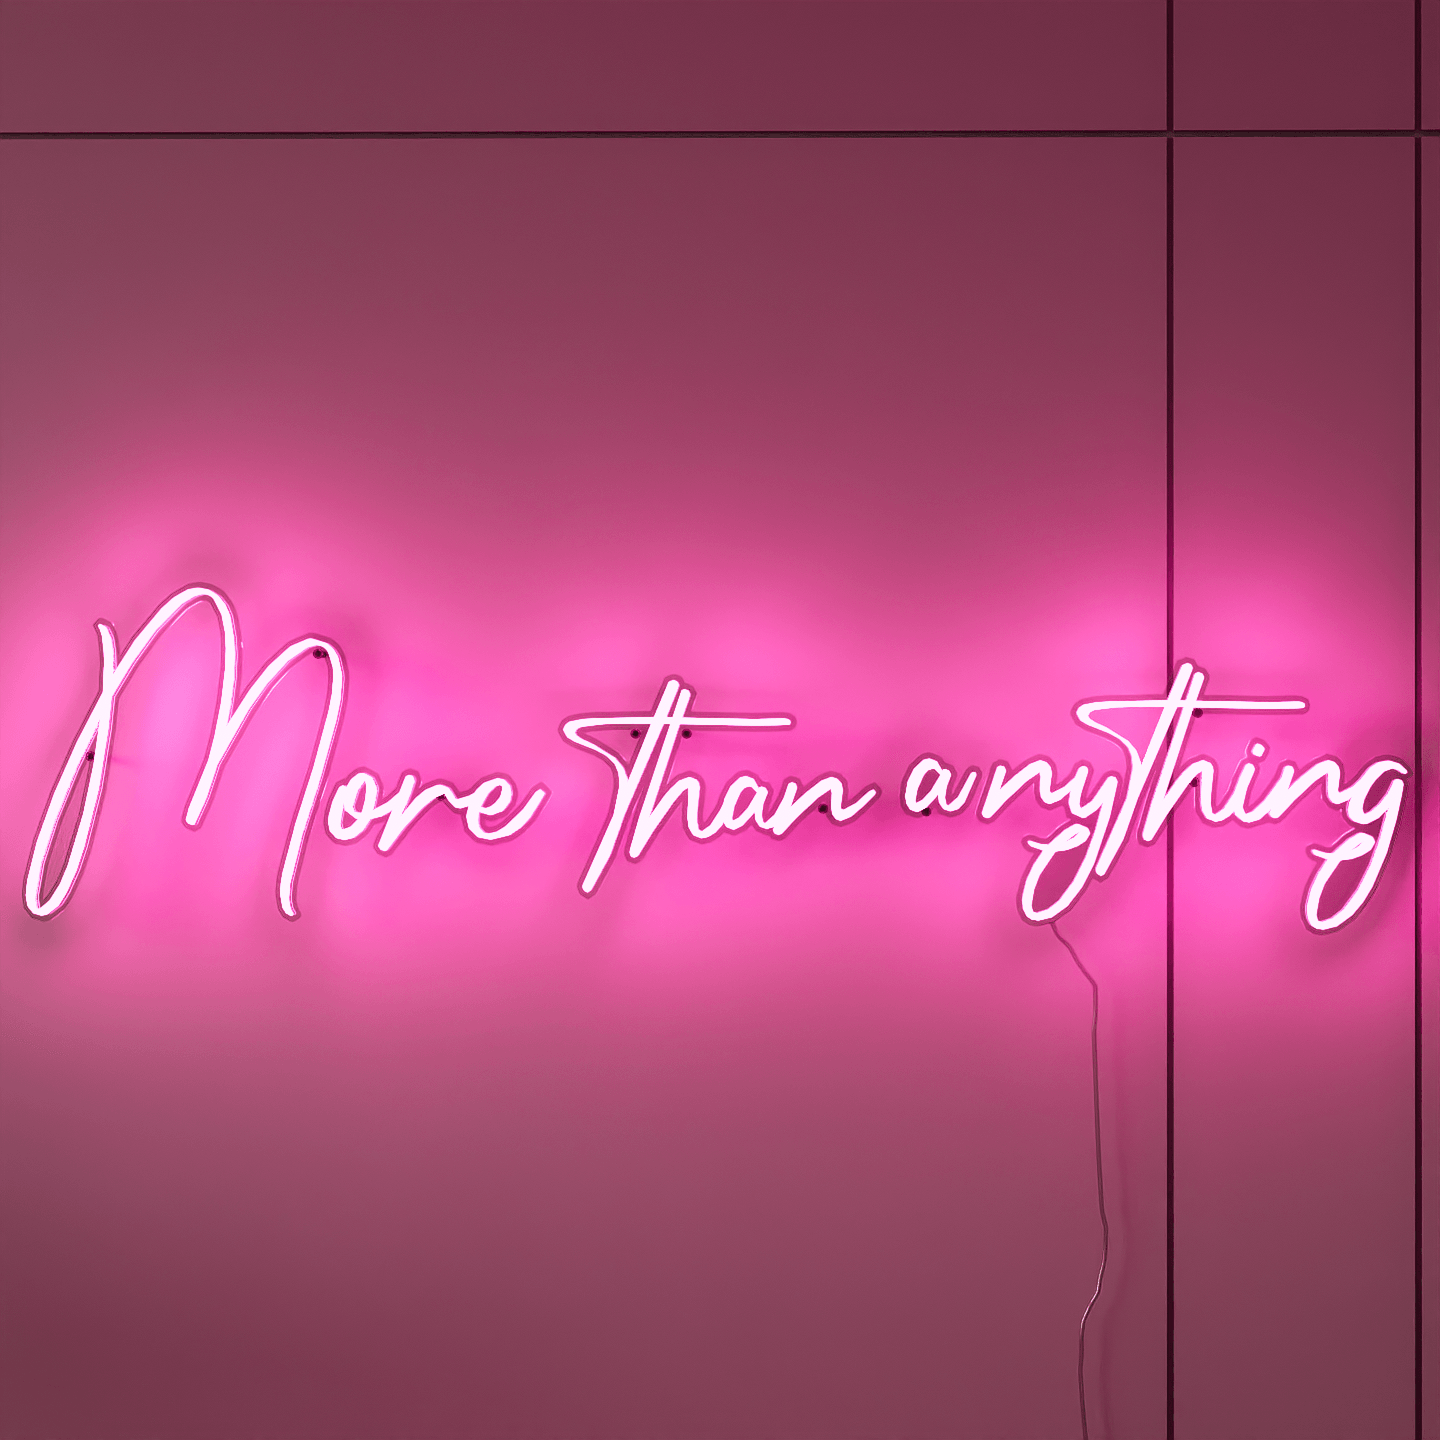 light-up-pink-neon-lights-hanging-on-the-wall-at-night-more-than-anything